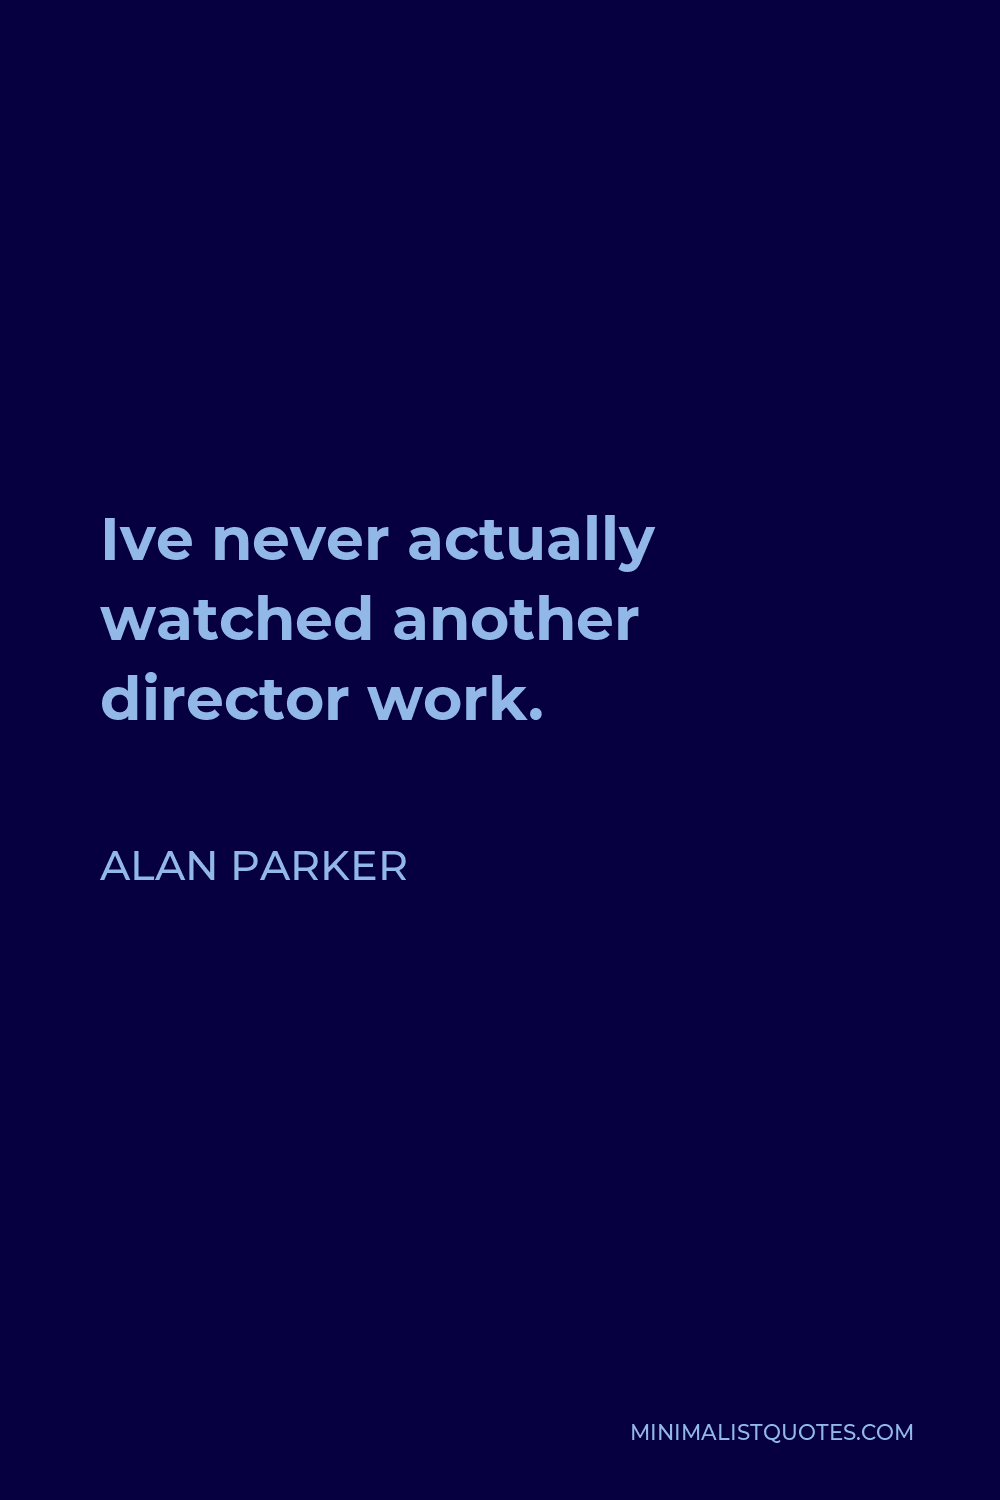 Alan Parker Quote - Ive never actually watched another director work.